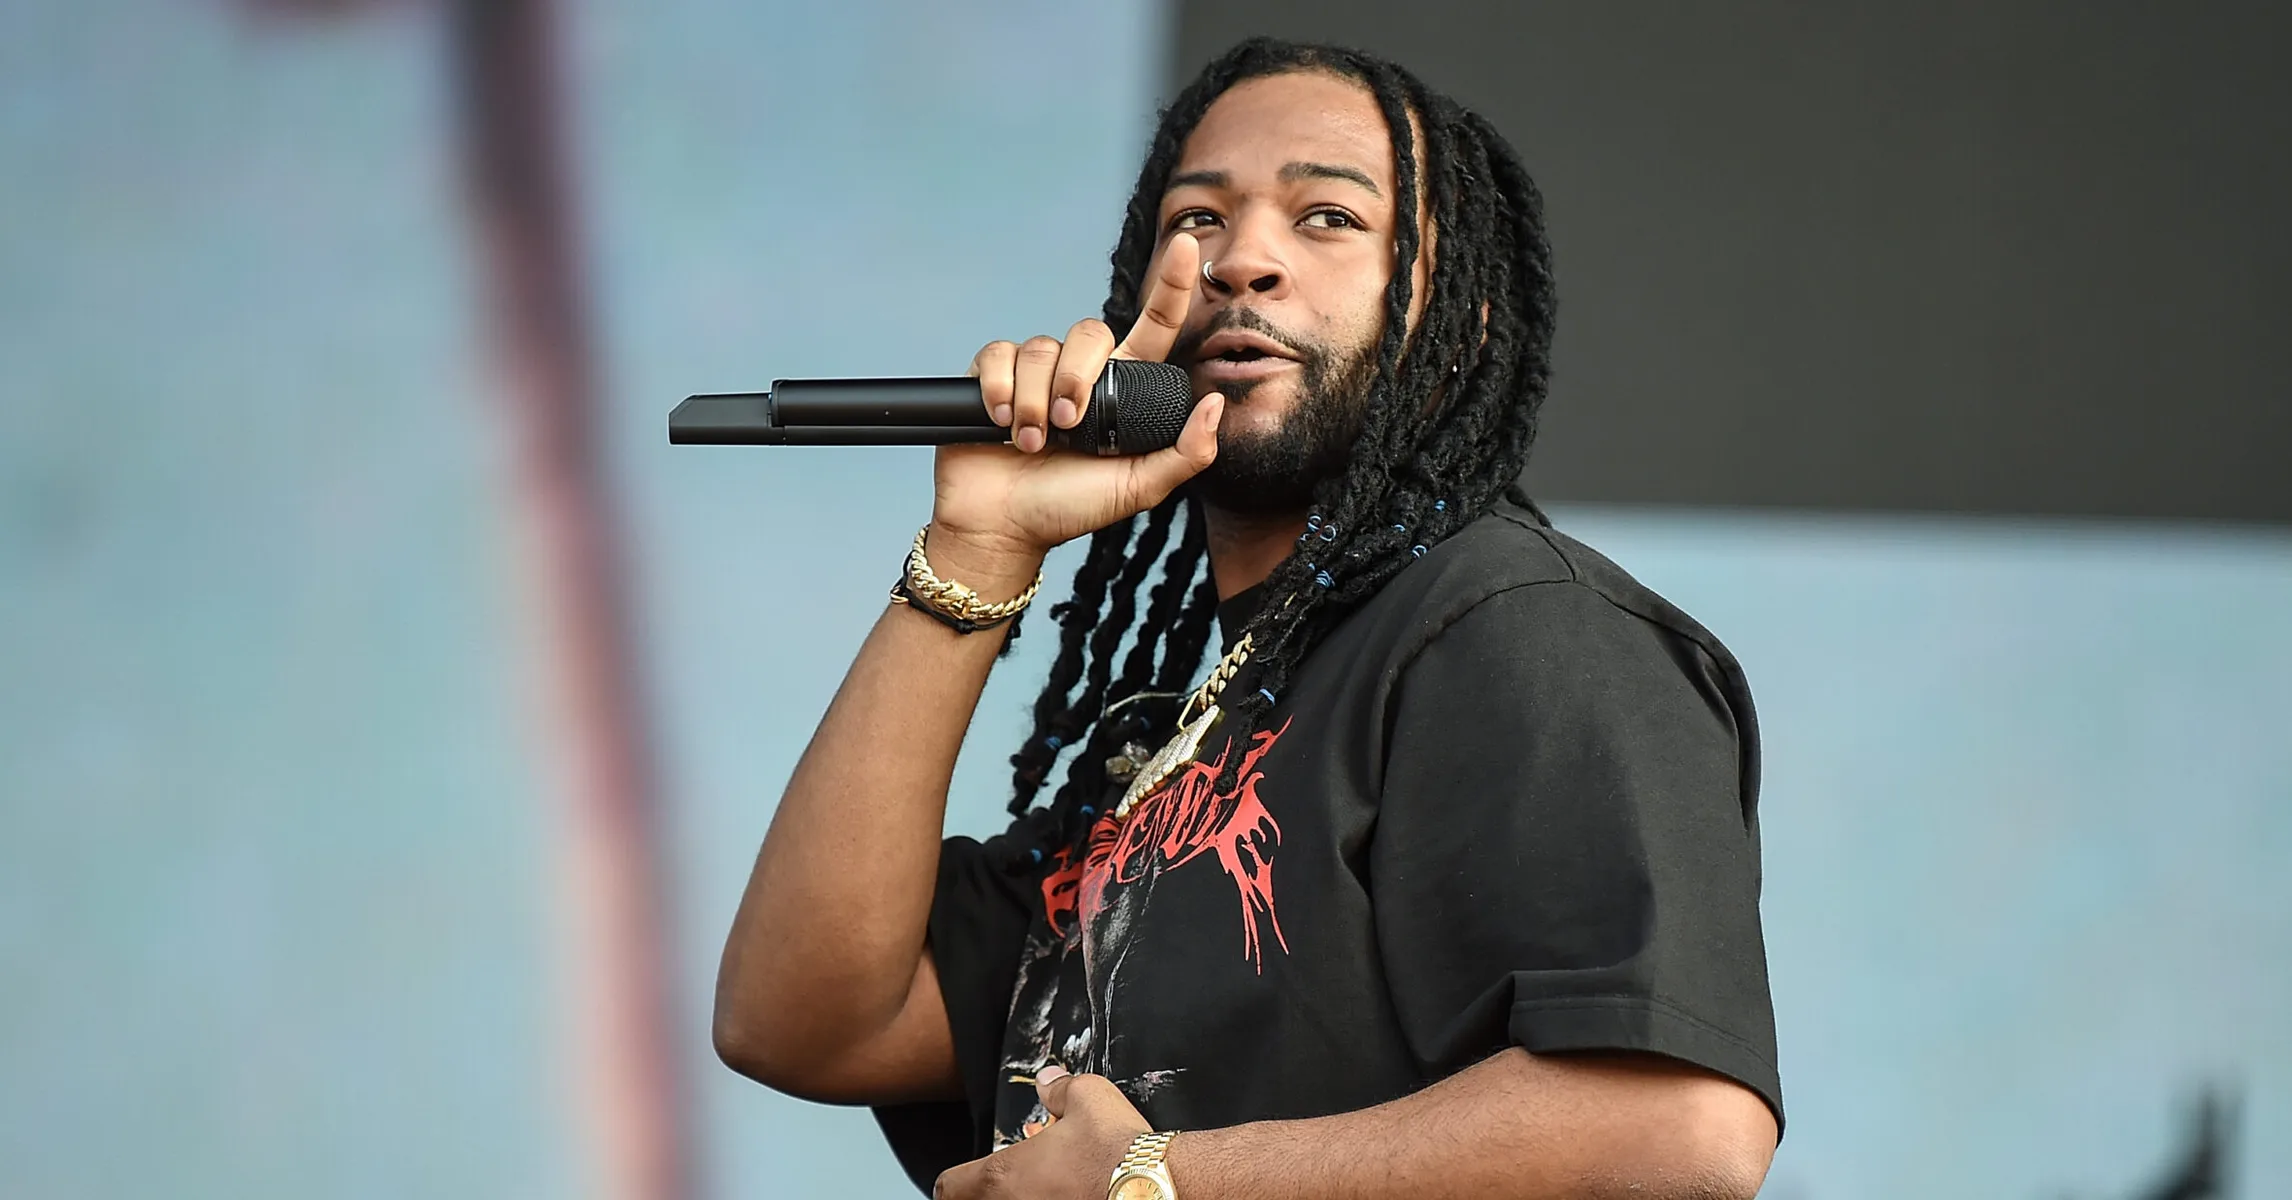 PartyNextDoor makes it clear that he has “nothing but love” for Chris Brown, Jeremih and Bryson Tiller